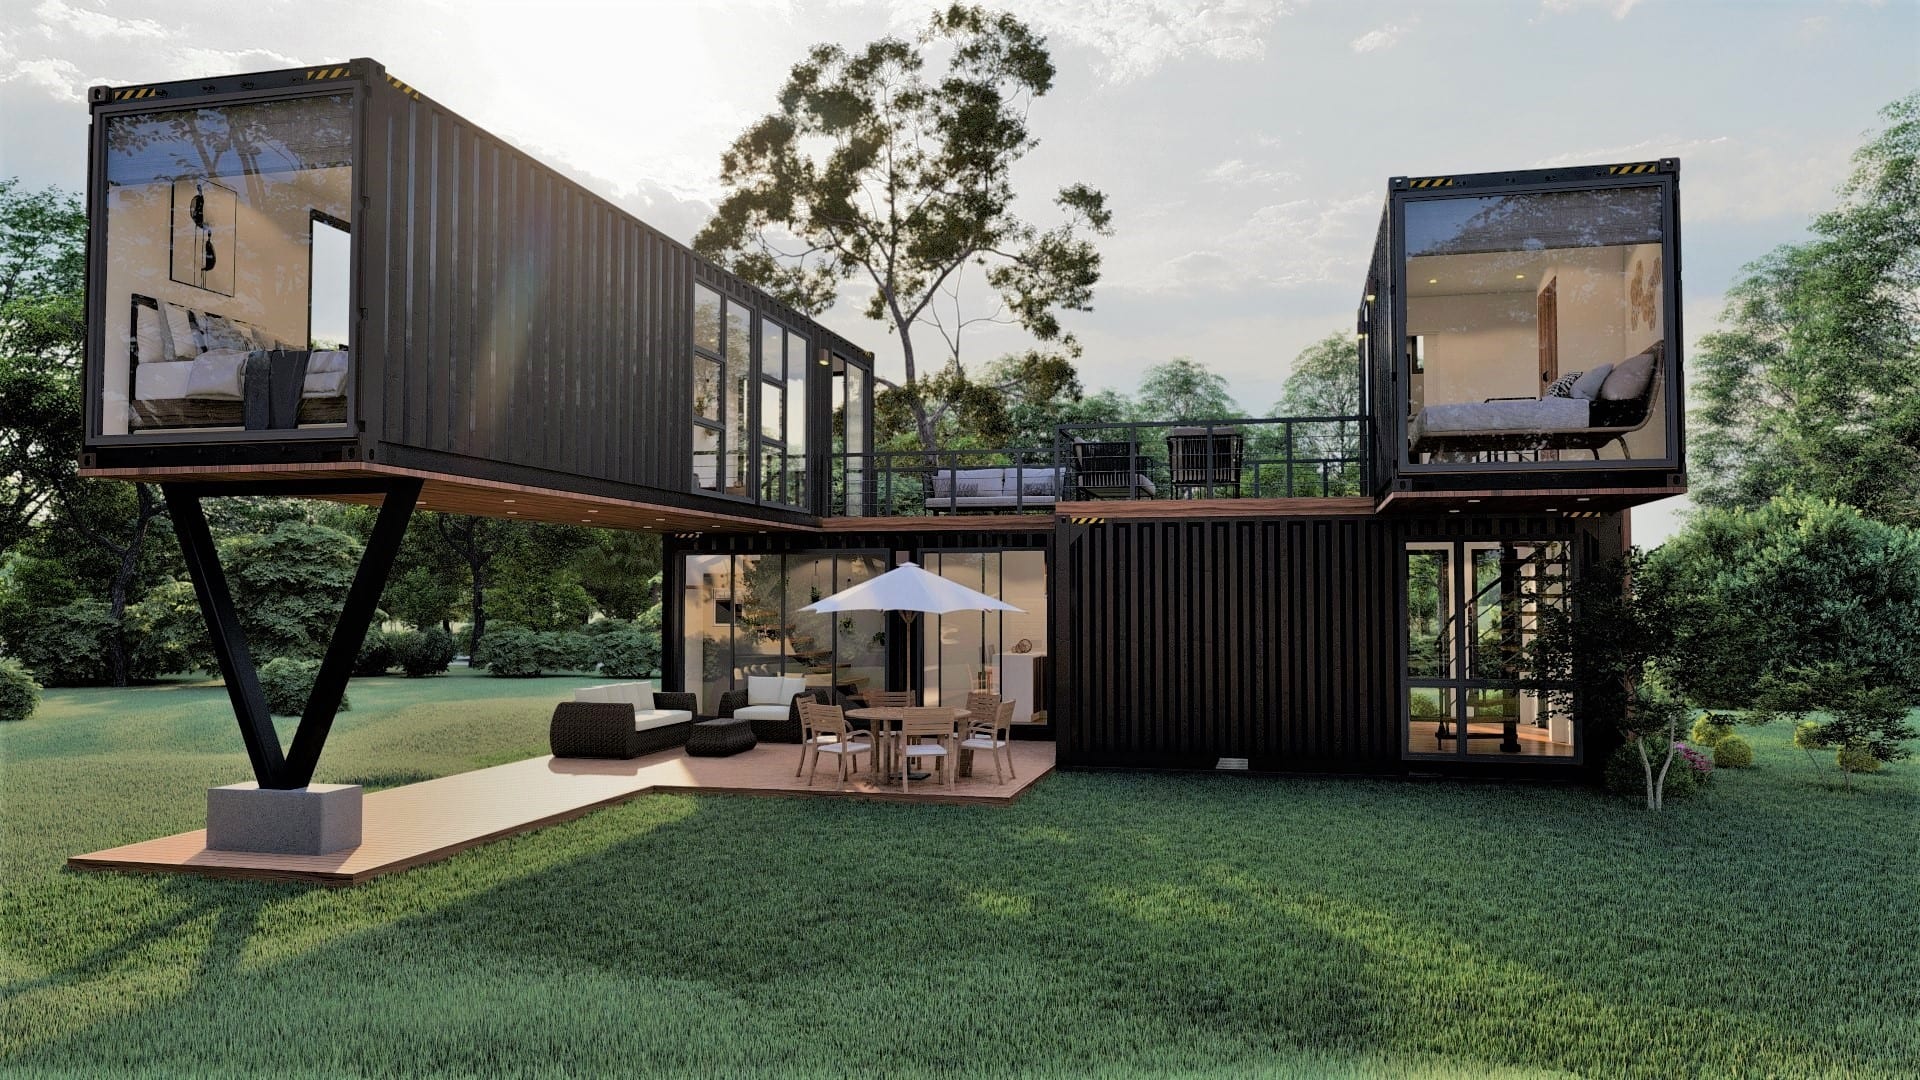 Shipping Container Home Build